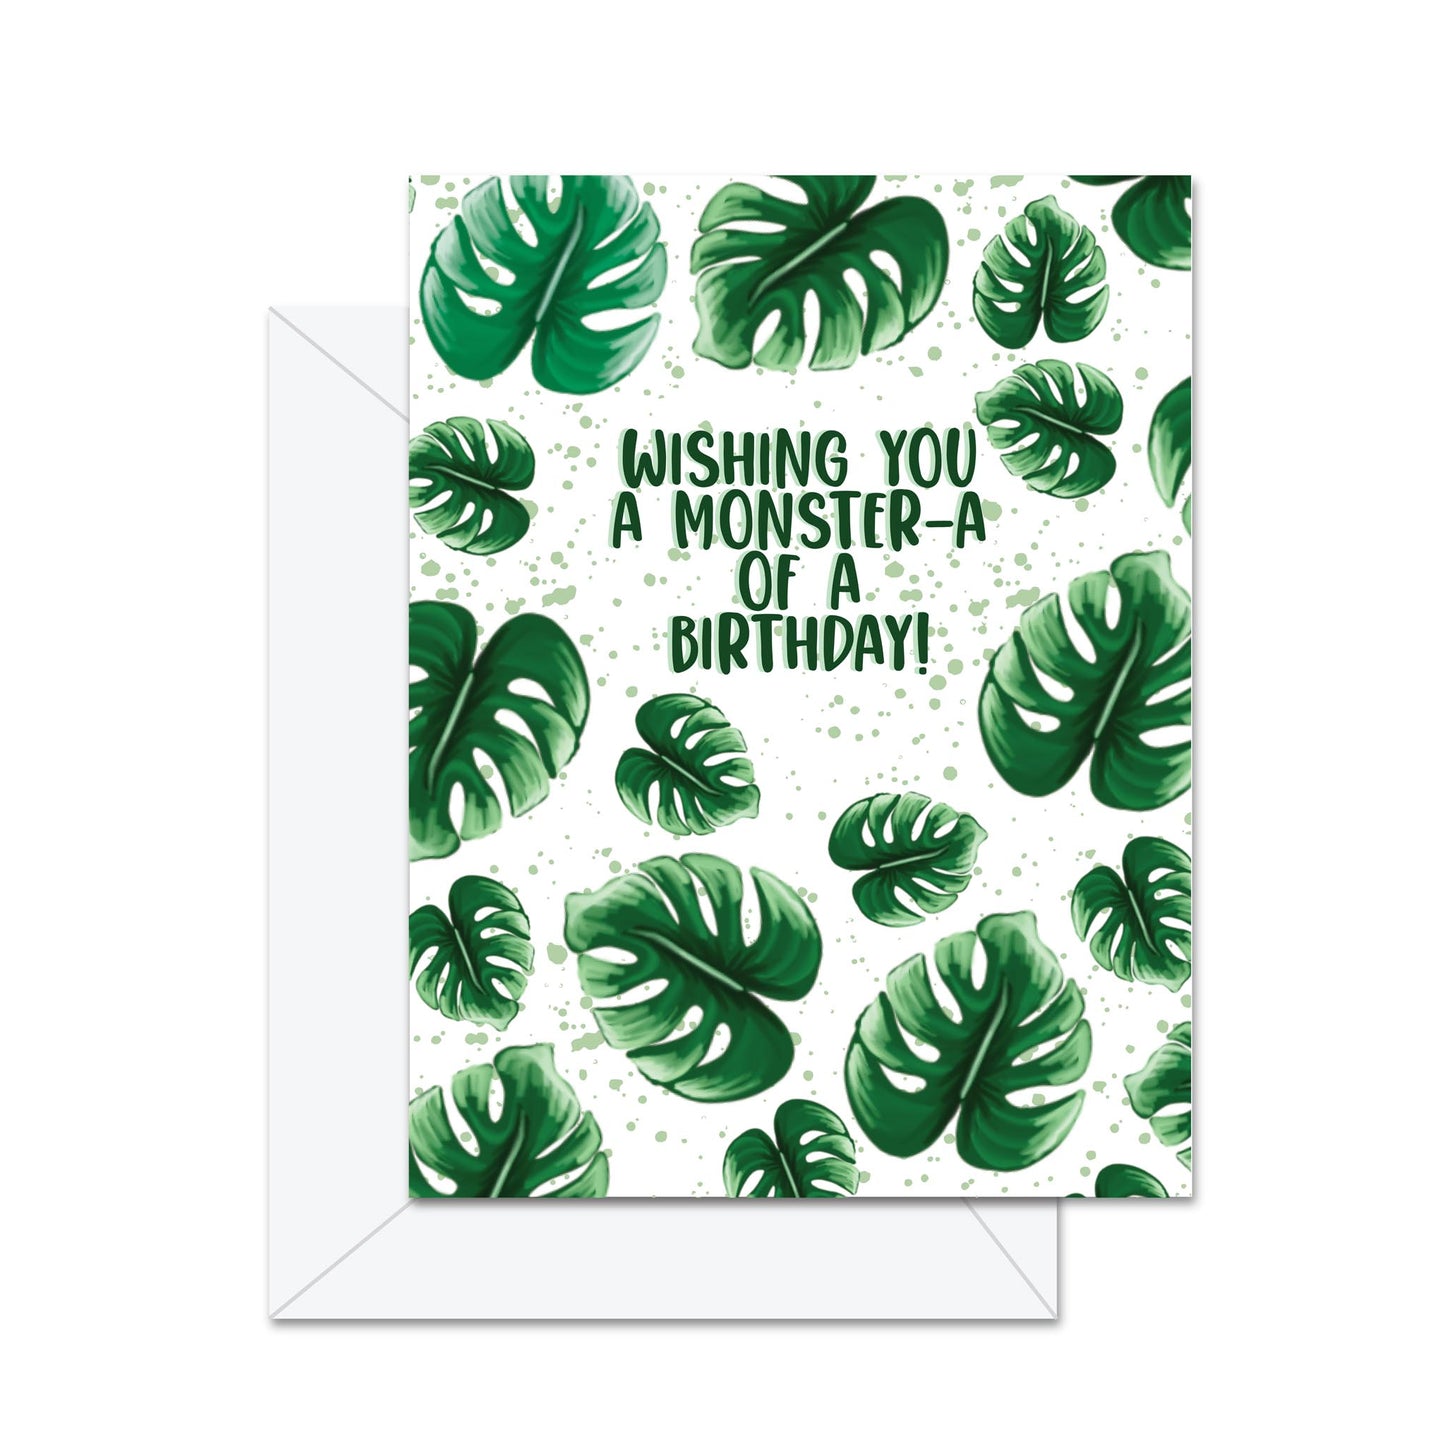 Wishing You A Monster-a Of A Birthday! - Greeting Card